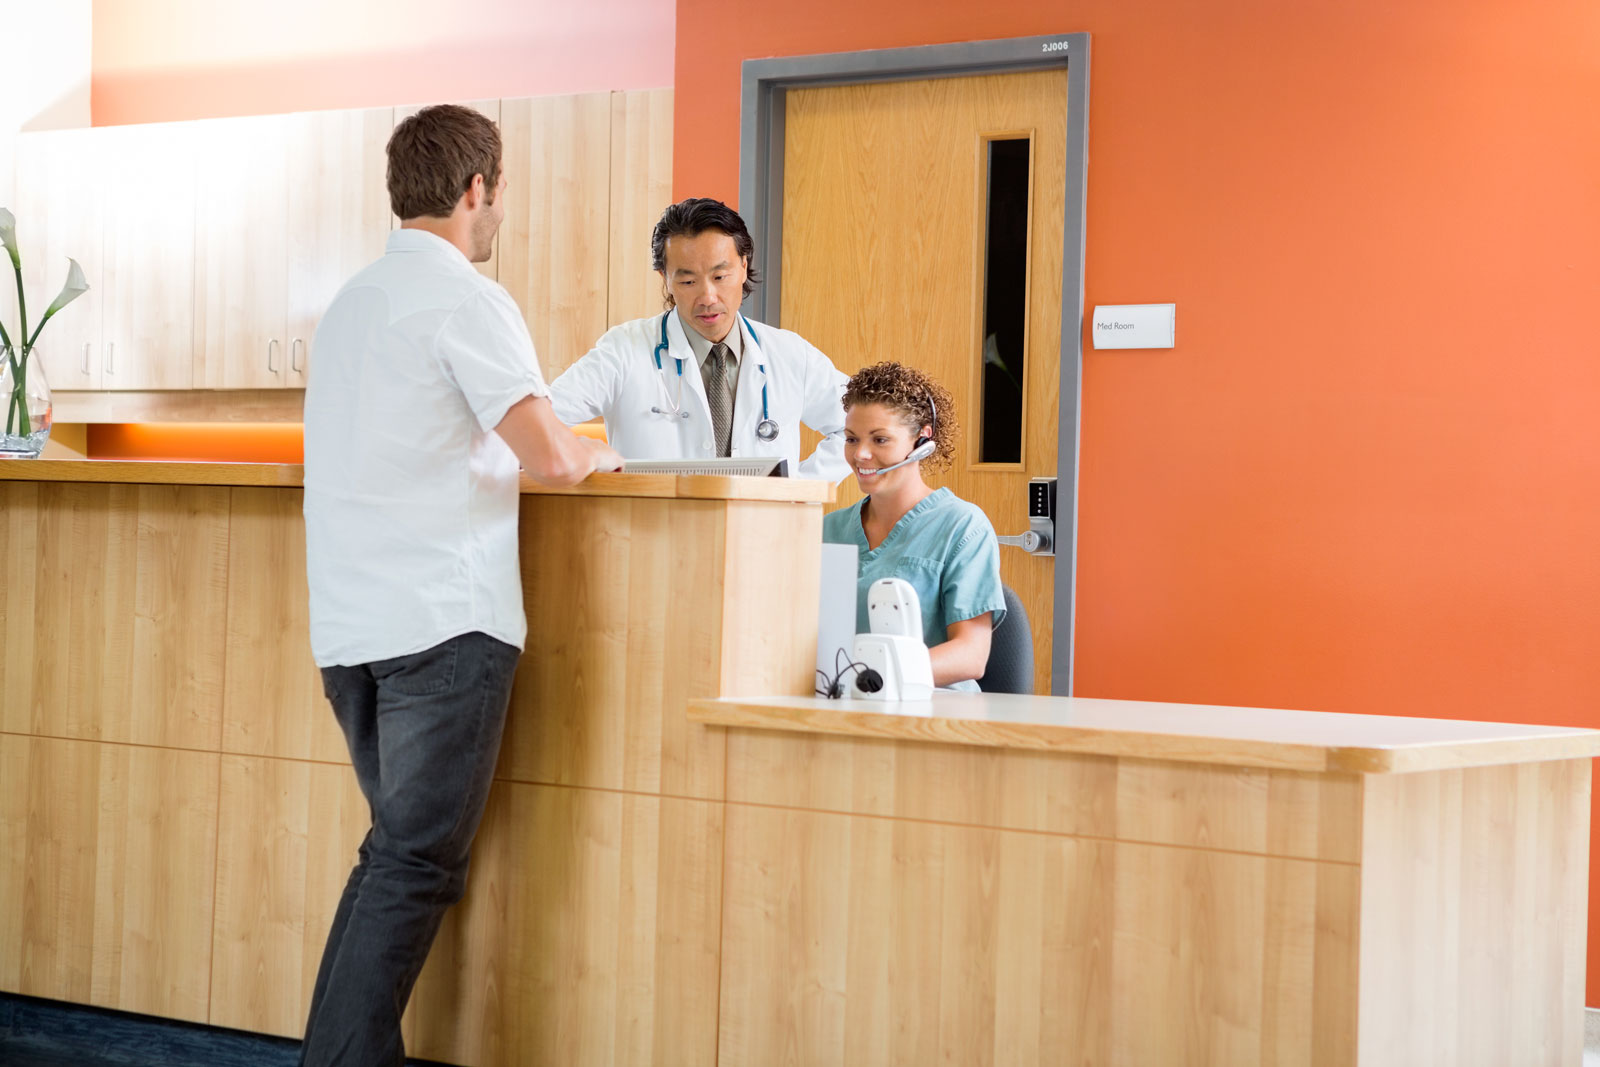 doctor-and-nurse-at-reception-desk-with-patient